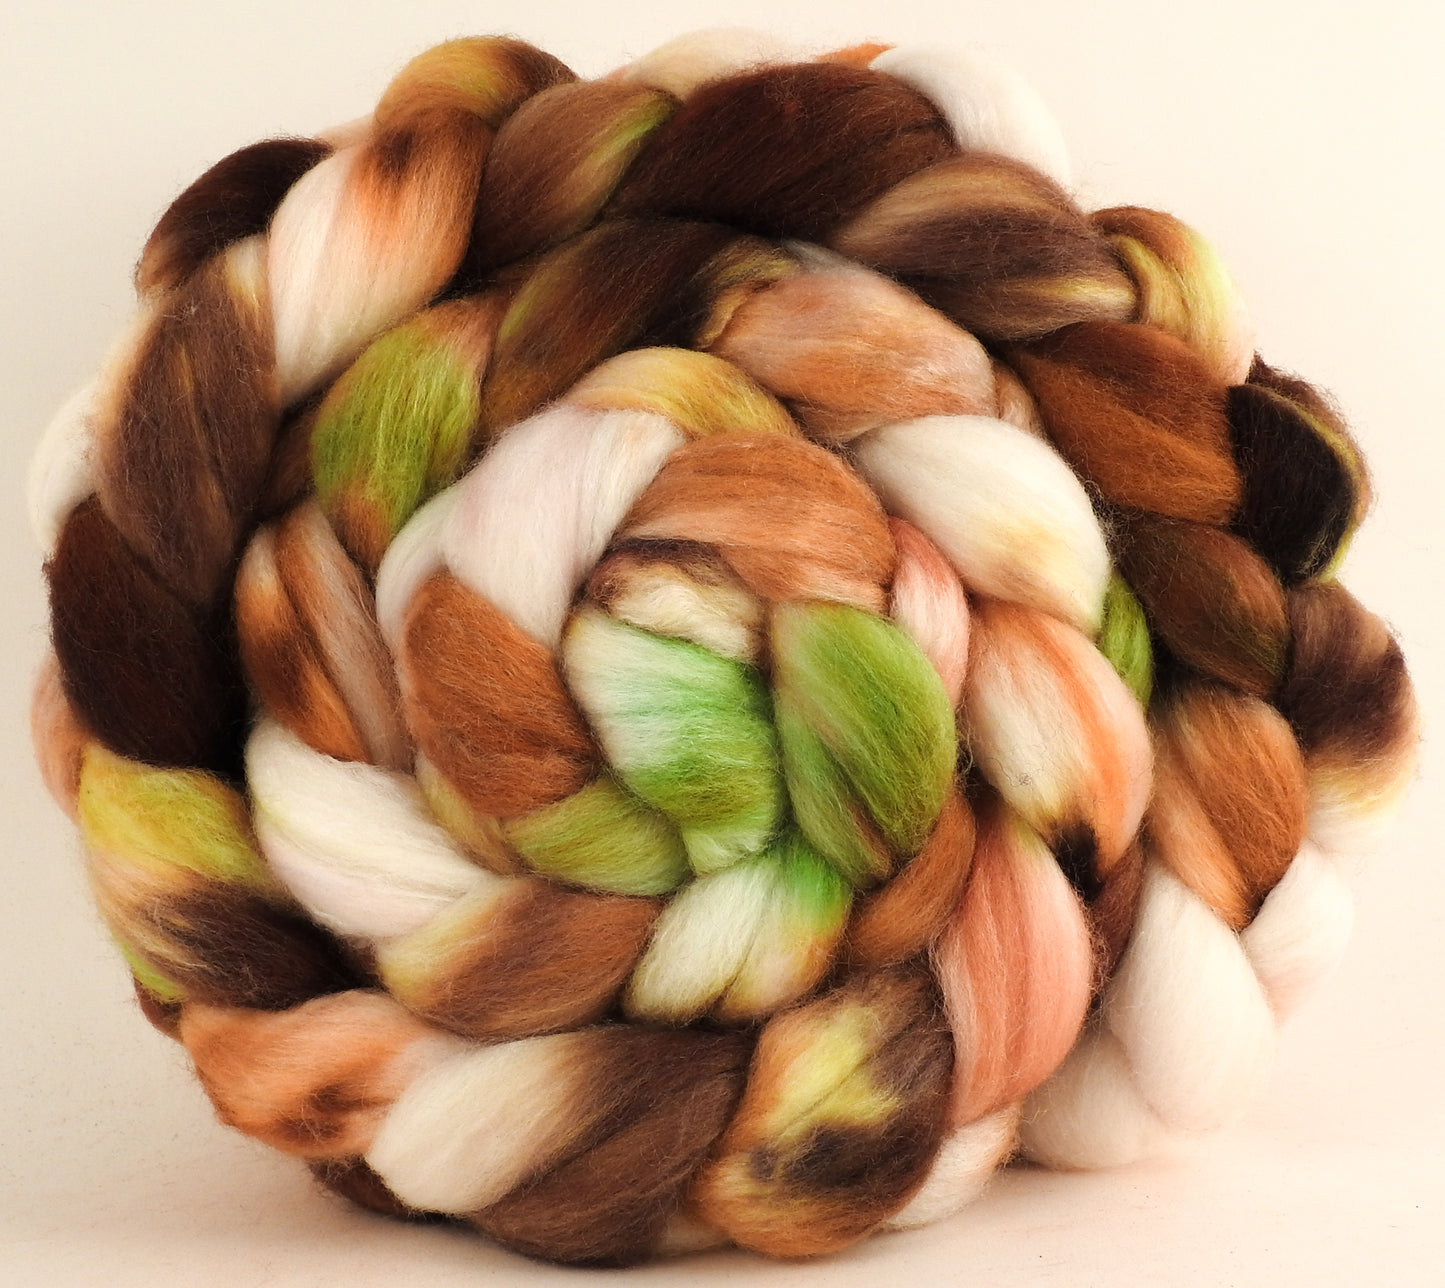 RESERVED for Needleq- Polwarth /Tussah silk Top (60/40)- Mungo -5.2 oz